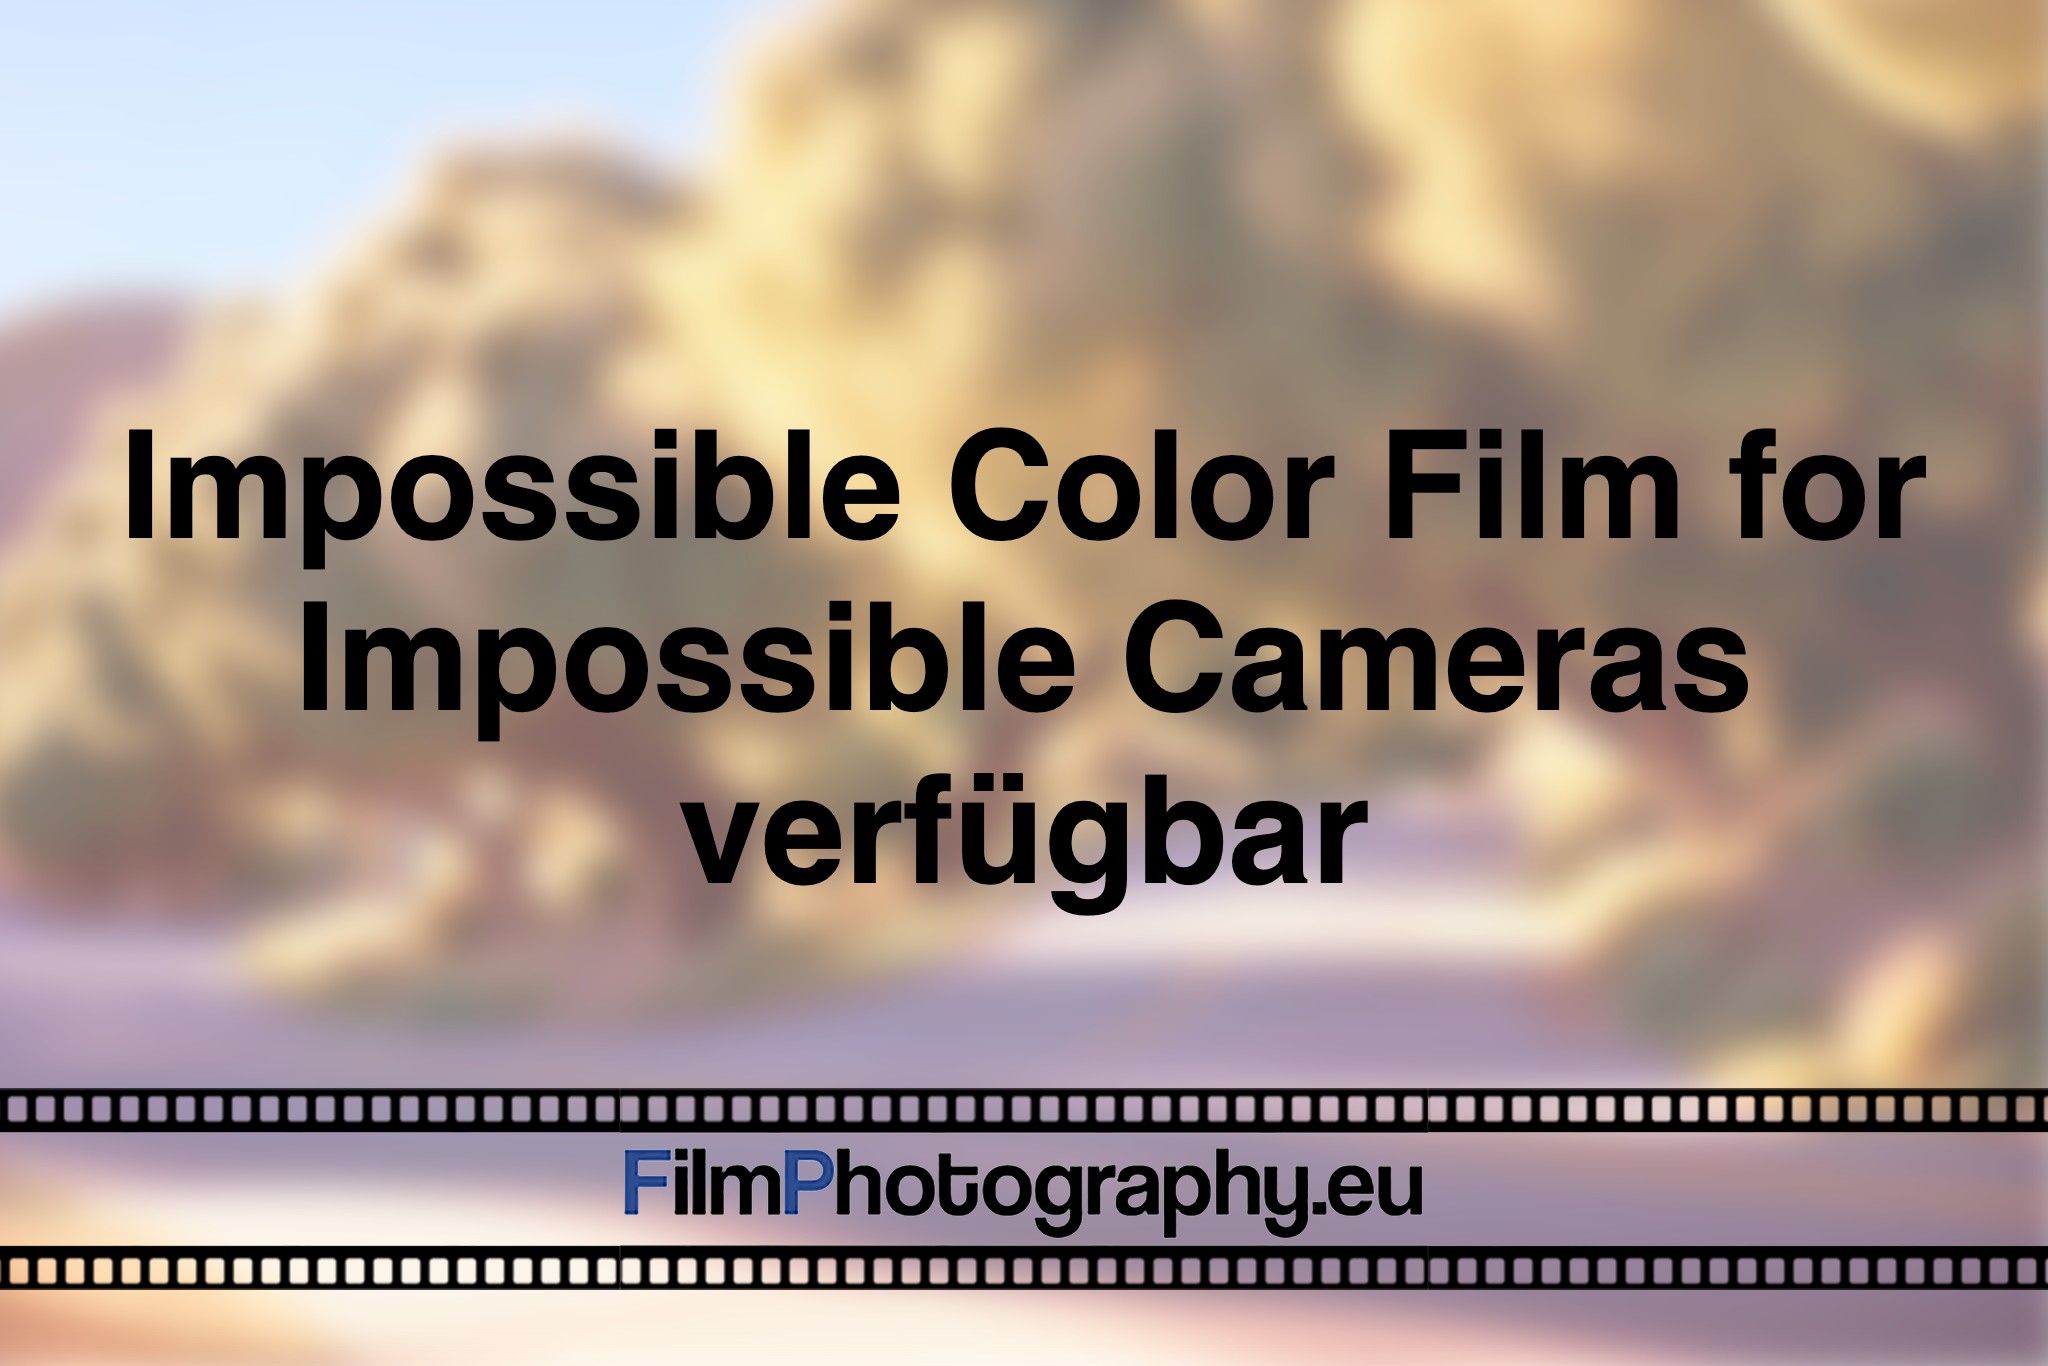 impossible-color-film-for-impossible-cameras-verfuegbar-photo-bnv